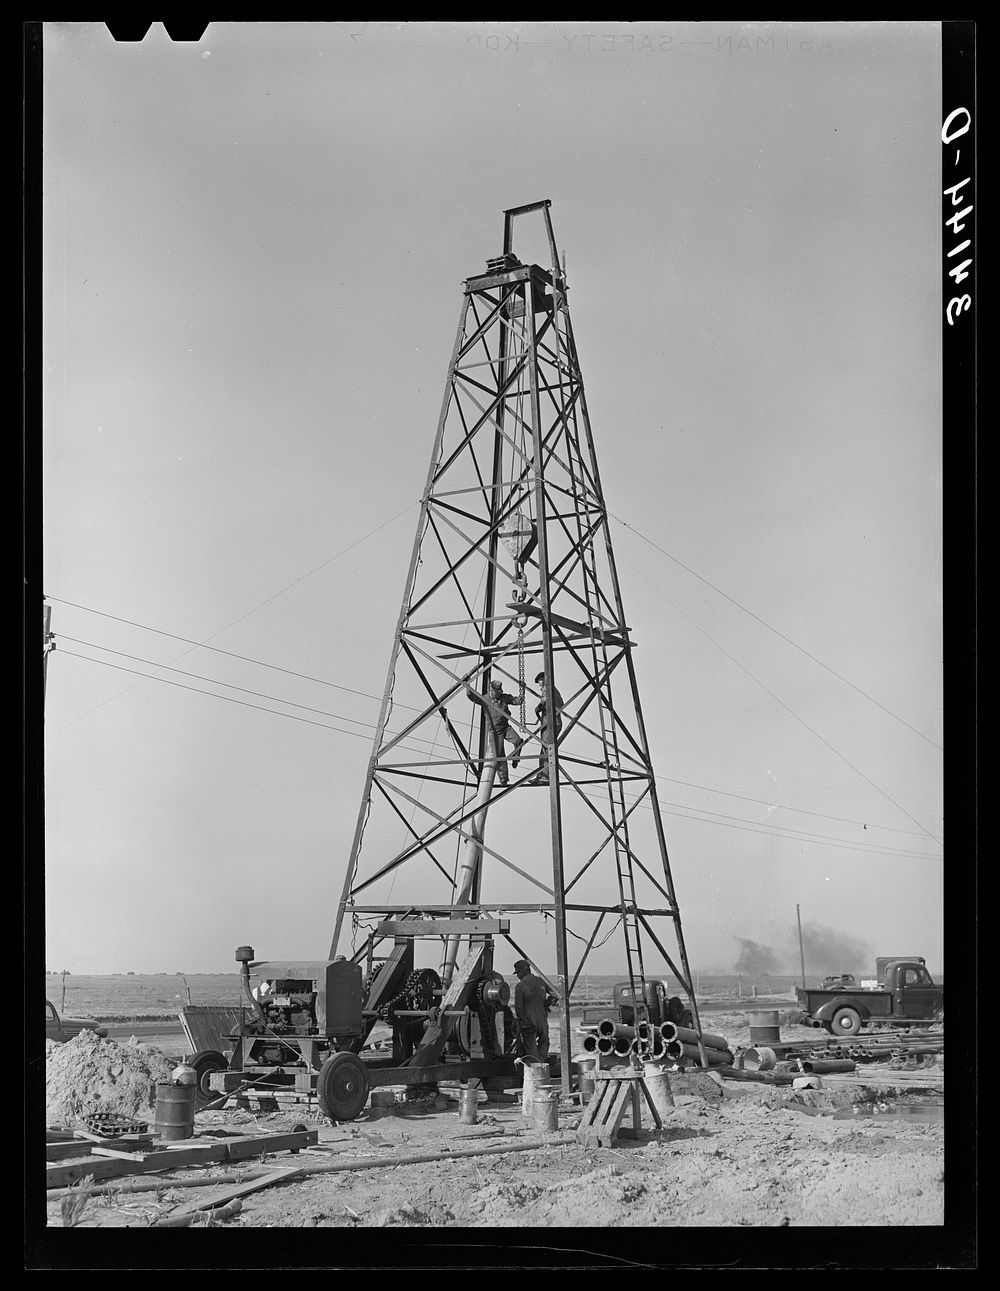 Lifting casing upon the derrick to finish a water well for irrigation purposes on farm near Garden City, Kansas by Russell…